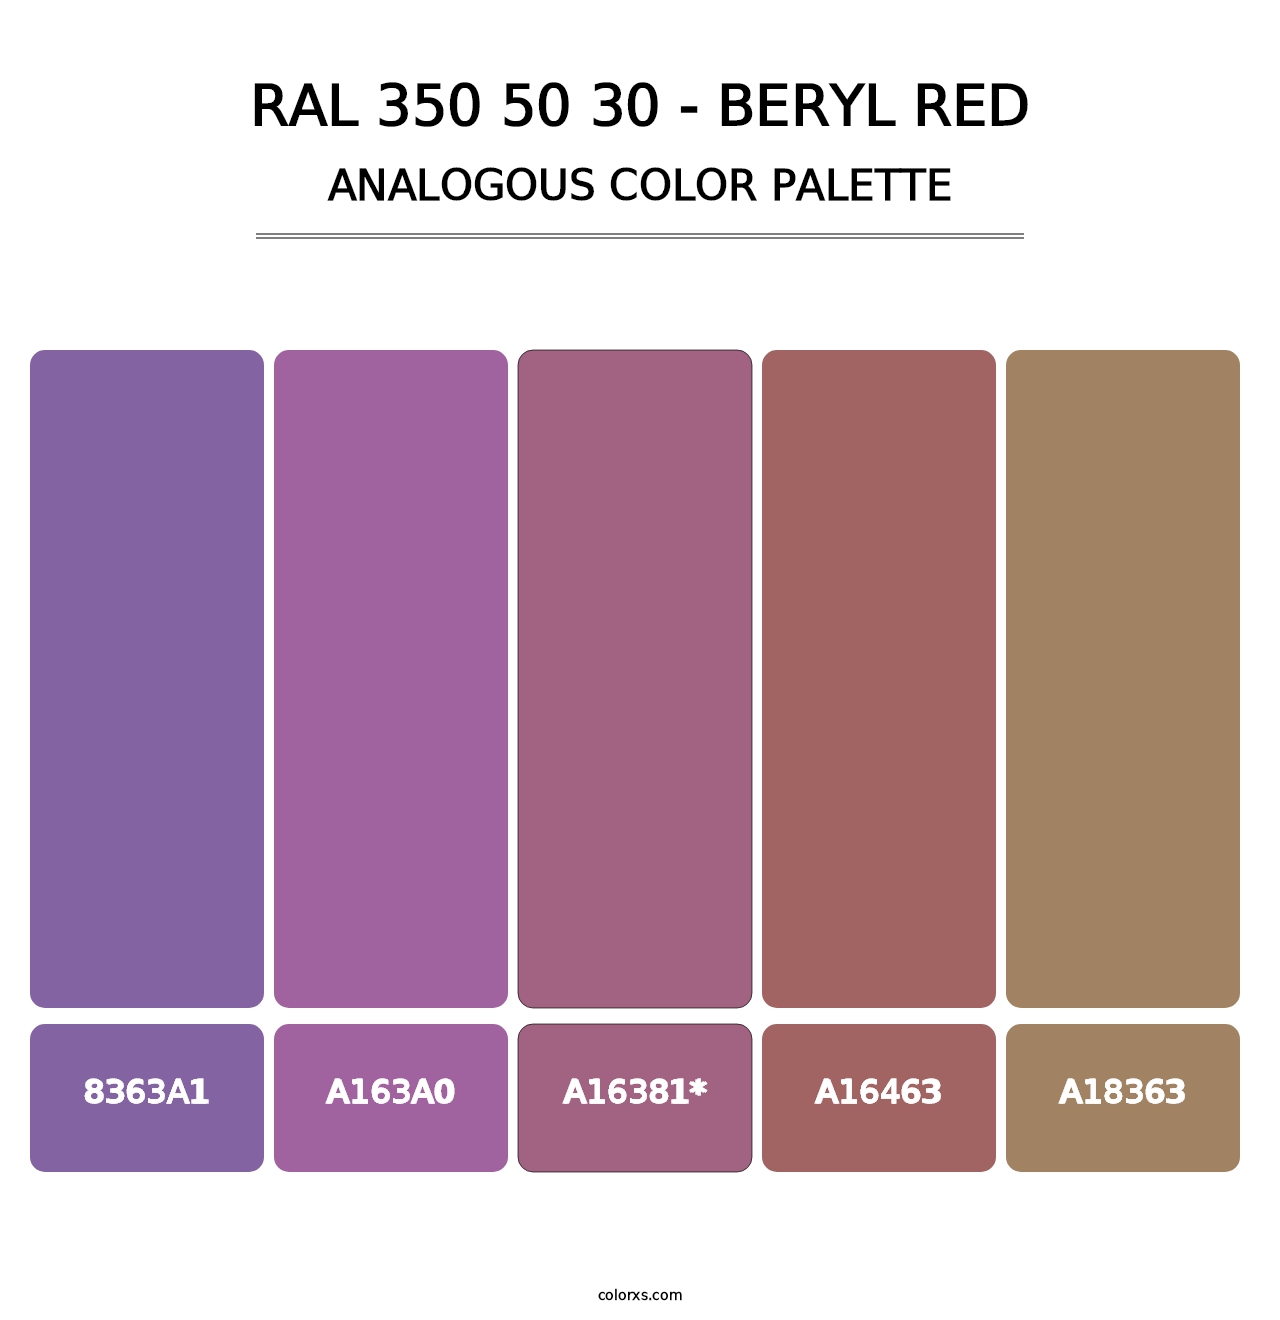 RAL 350 50 30 - Beryl Red - Analogous Color Palette